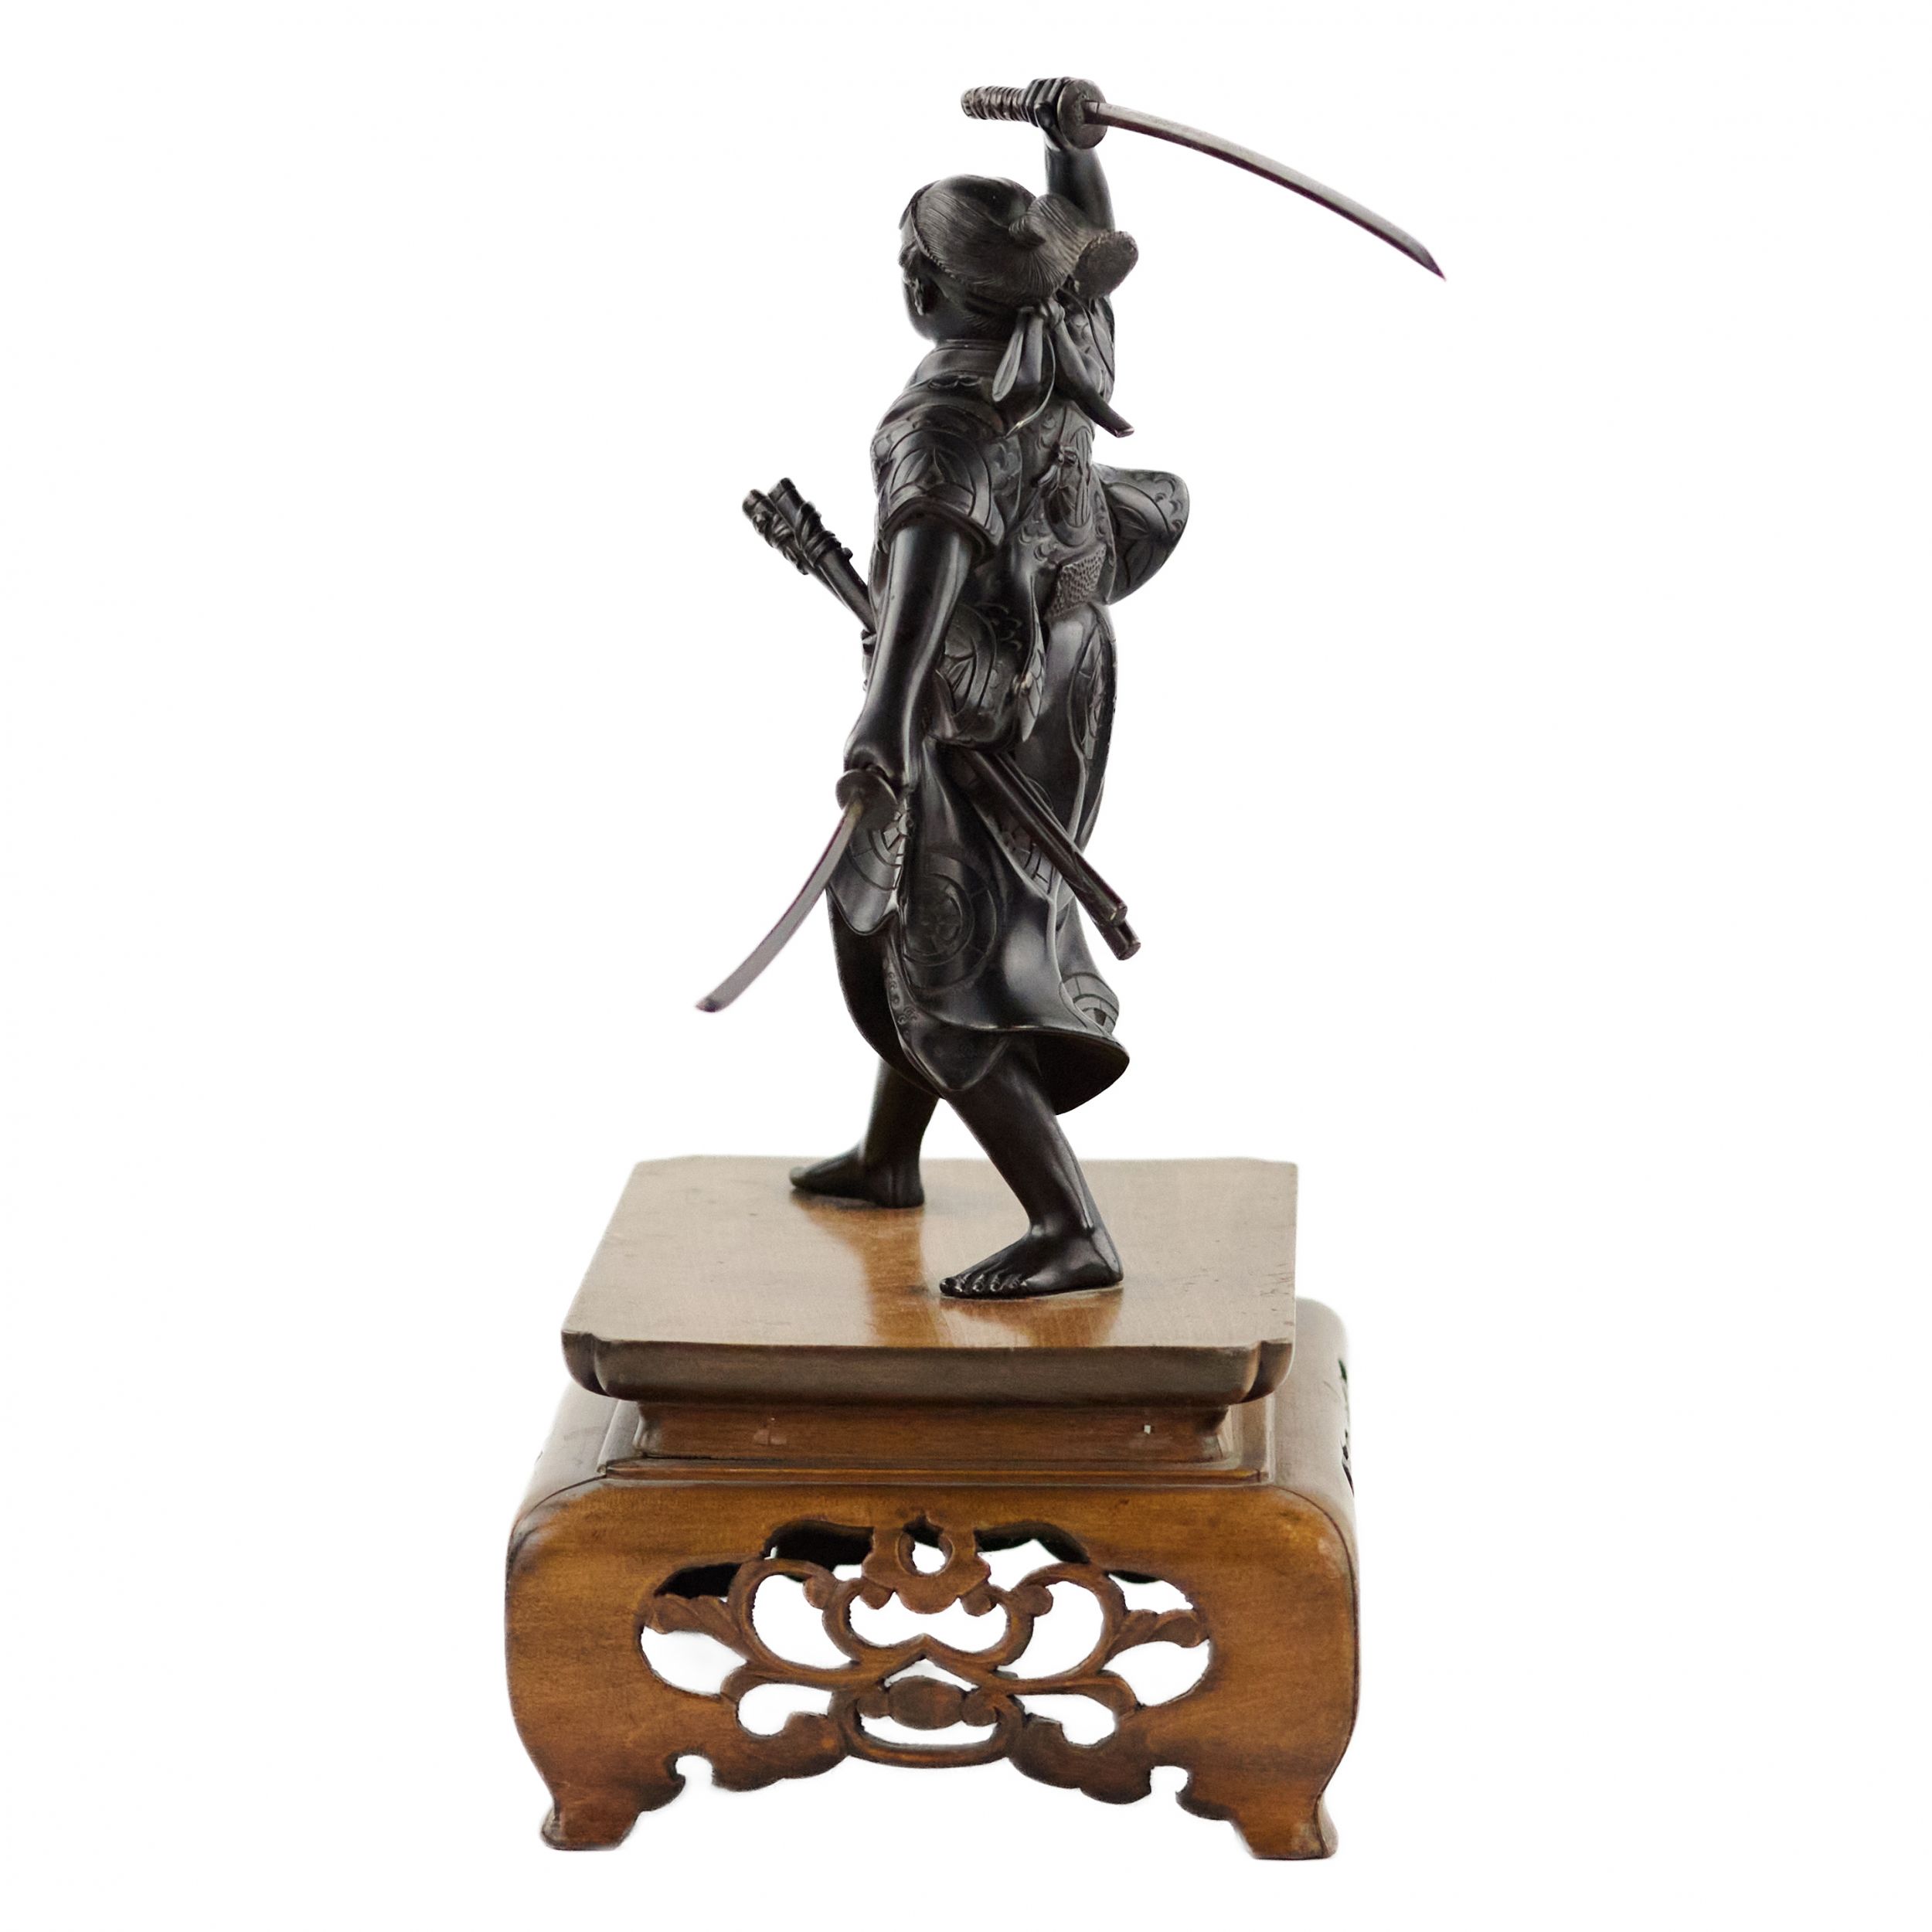 Japanese bronze sculpture of a samurai warrior. Japan. Meiji. The turn of the 19th-20th century. - Image 3 of 6